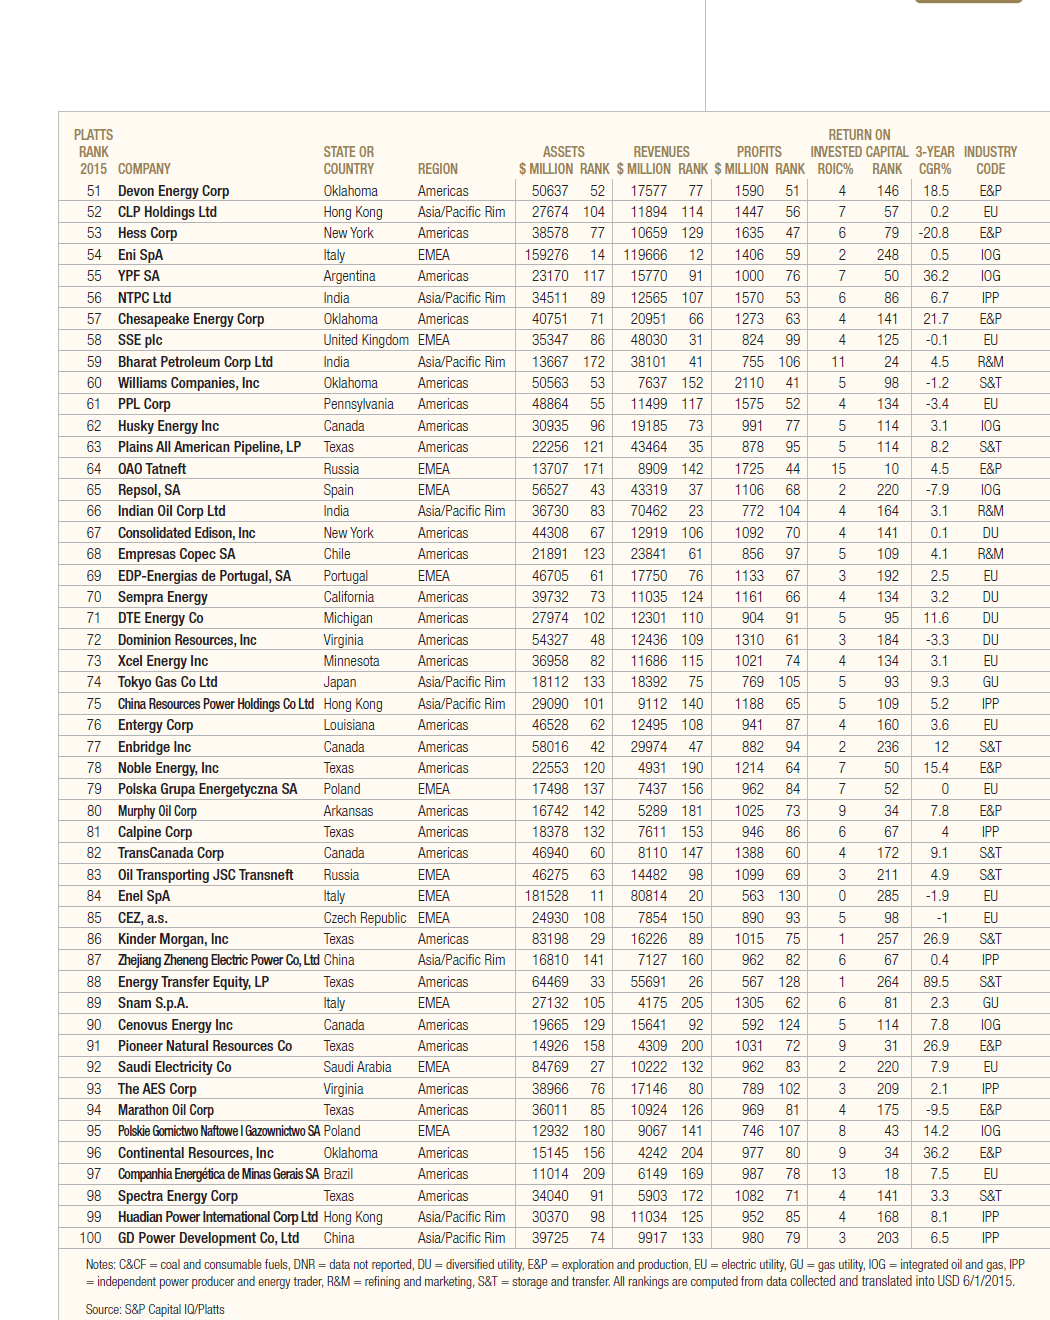 Platts Top 250 Energy Companies for 2015-Page 2